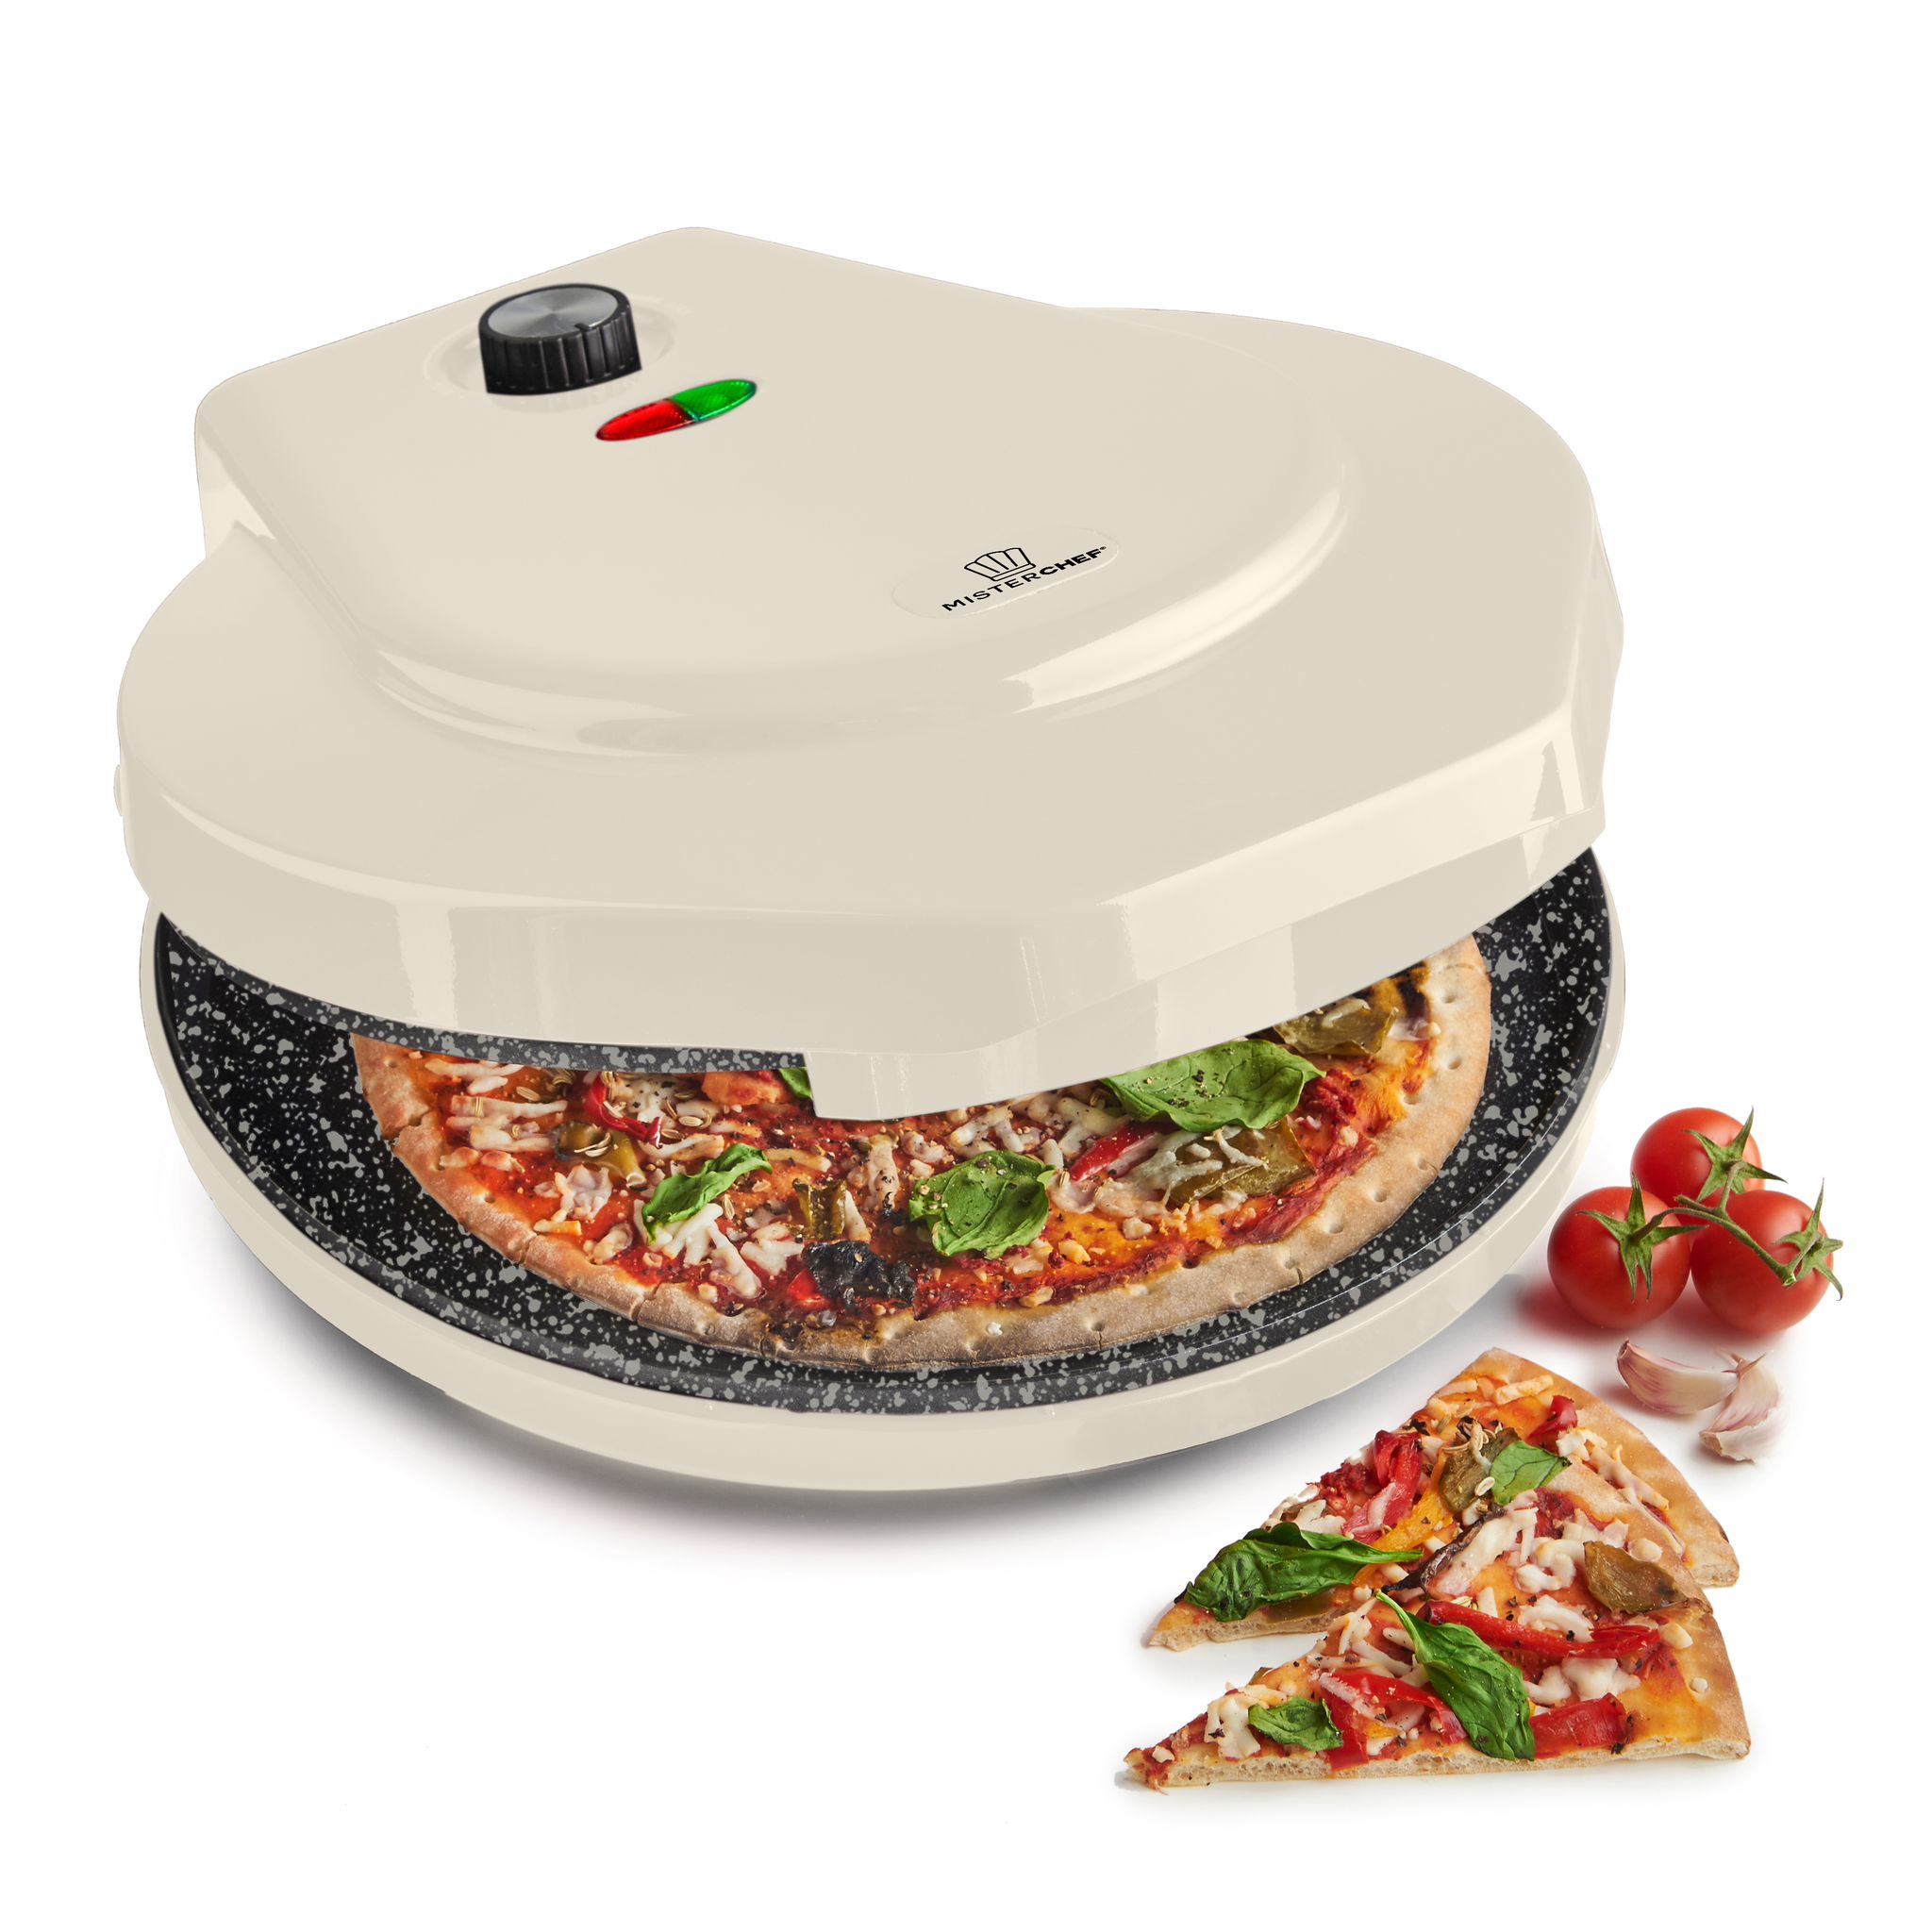 Professional Pizza Maker with ceramic plates